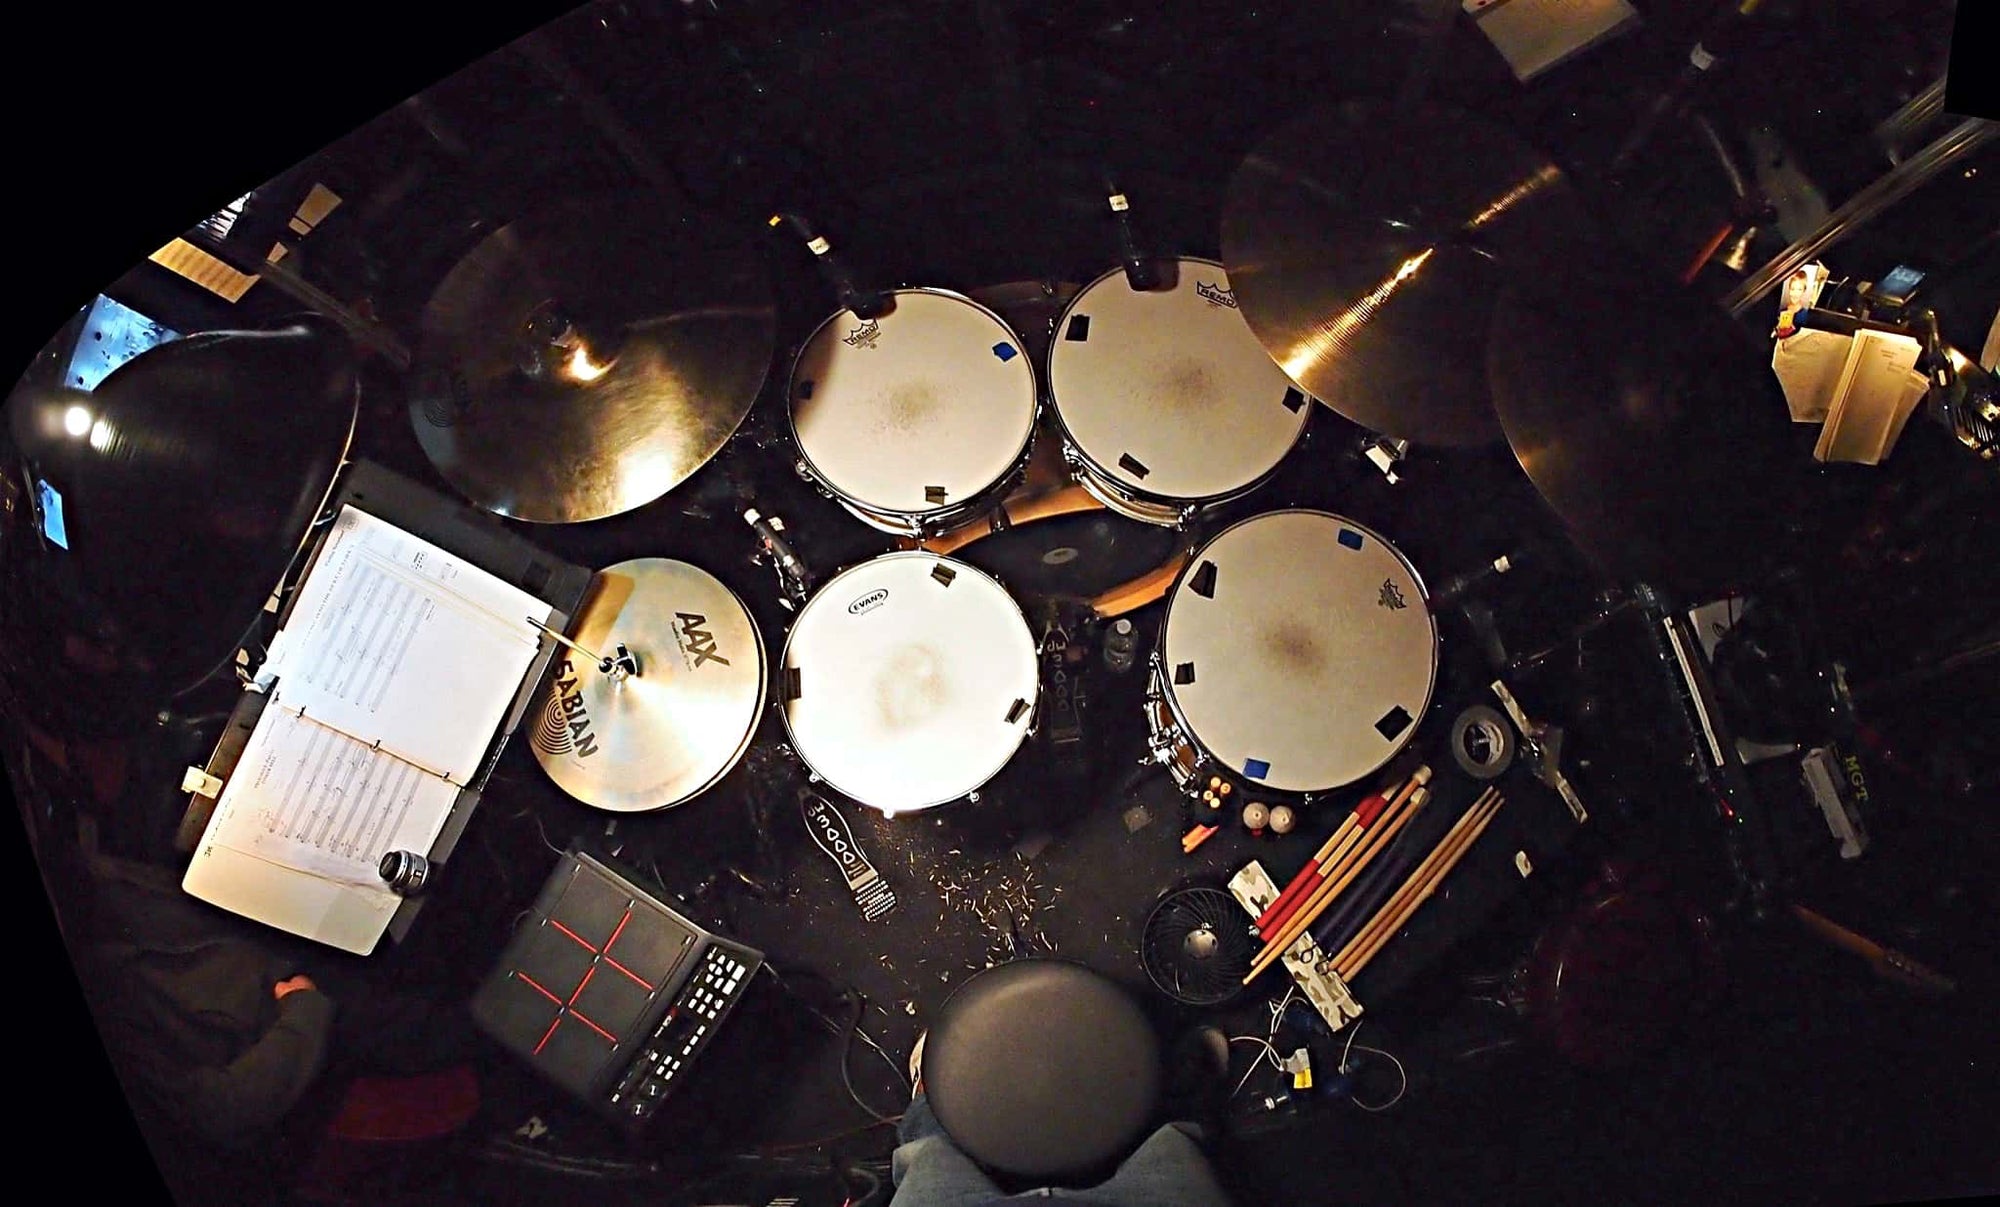 Joe Choroszewski’s drum set setup for the Broadway production of Finding Neverland at the Lunt-Fontanne Theatre.